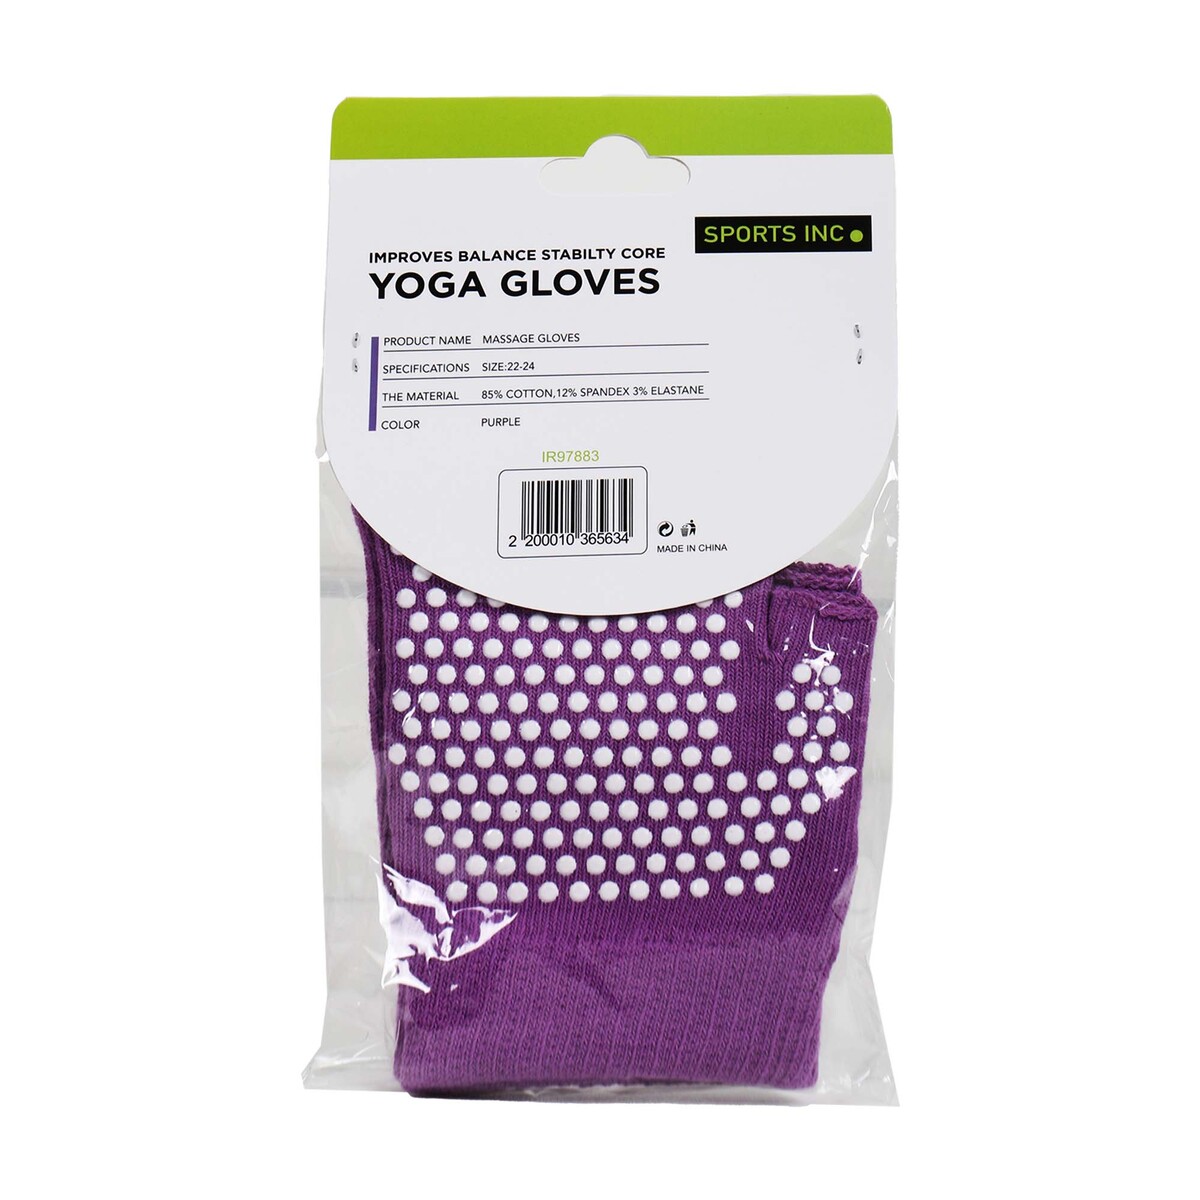 Sports INC Yoga Gloves IR97883A Online at Best Price